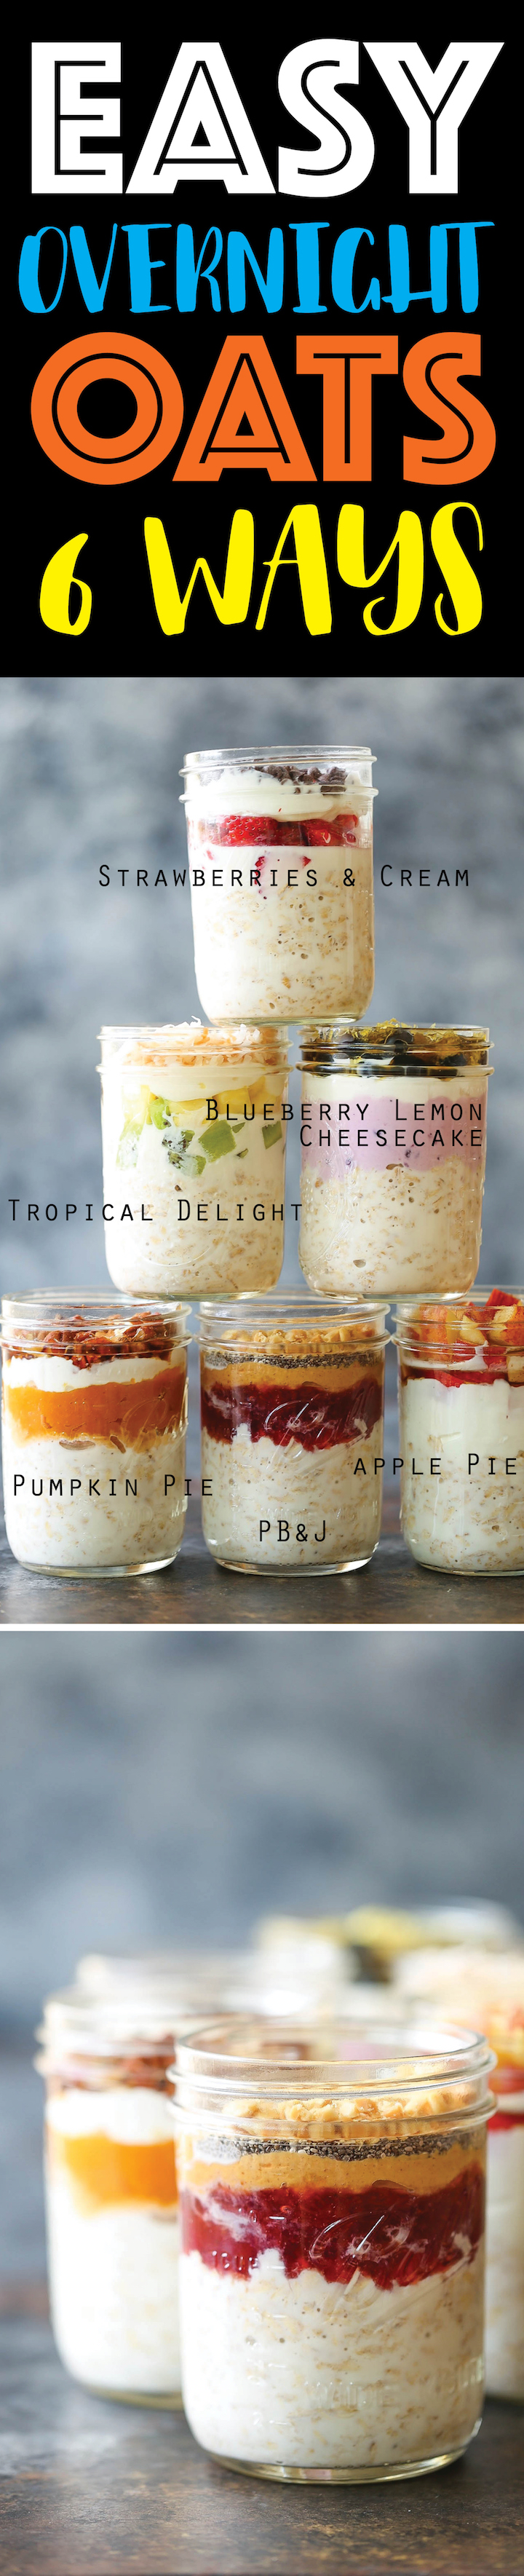 Easy Overnight Oats - Soak your oats overnight for the quickest breakfast all week long! You can double or triple the recipe. Seriously. It's just so easy!